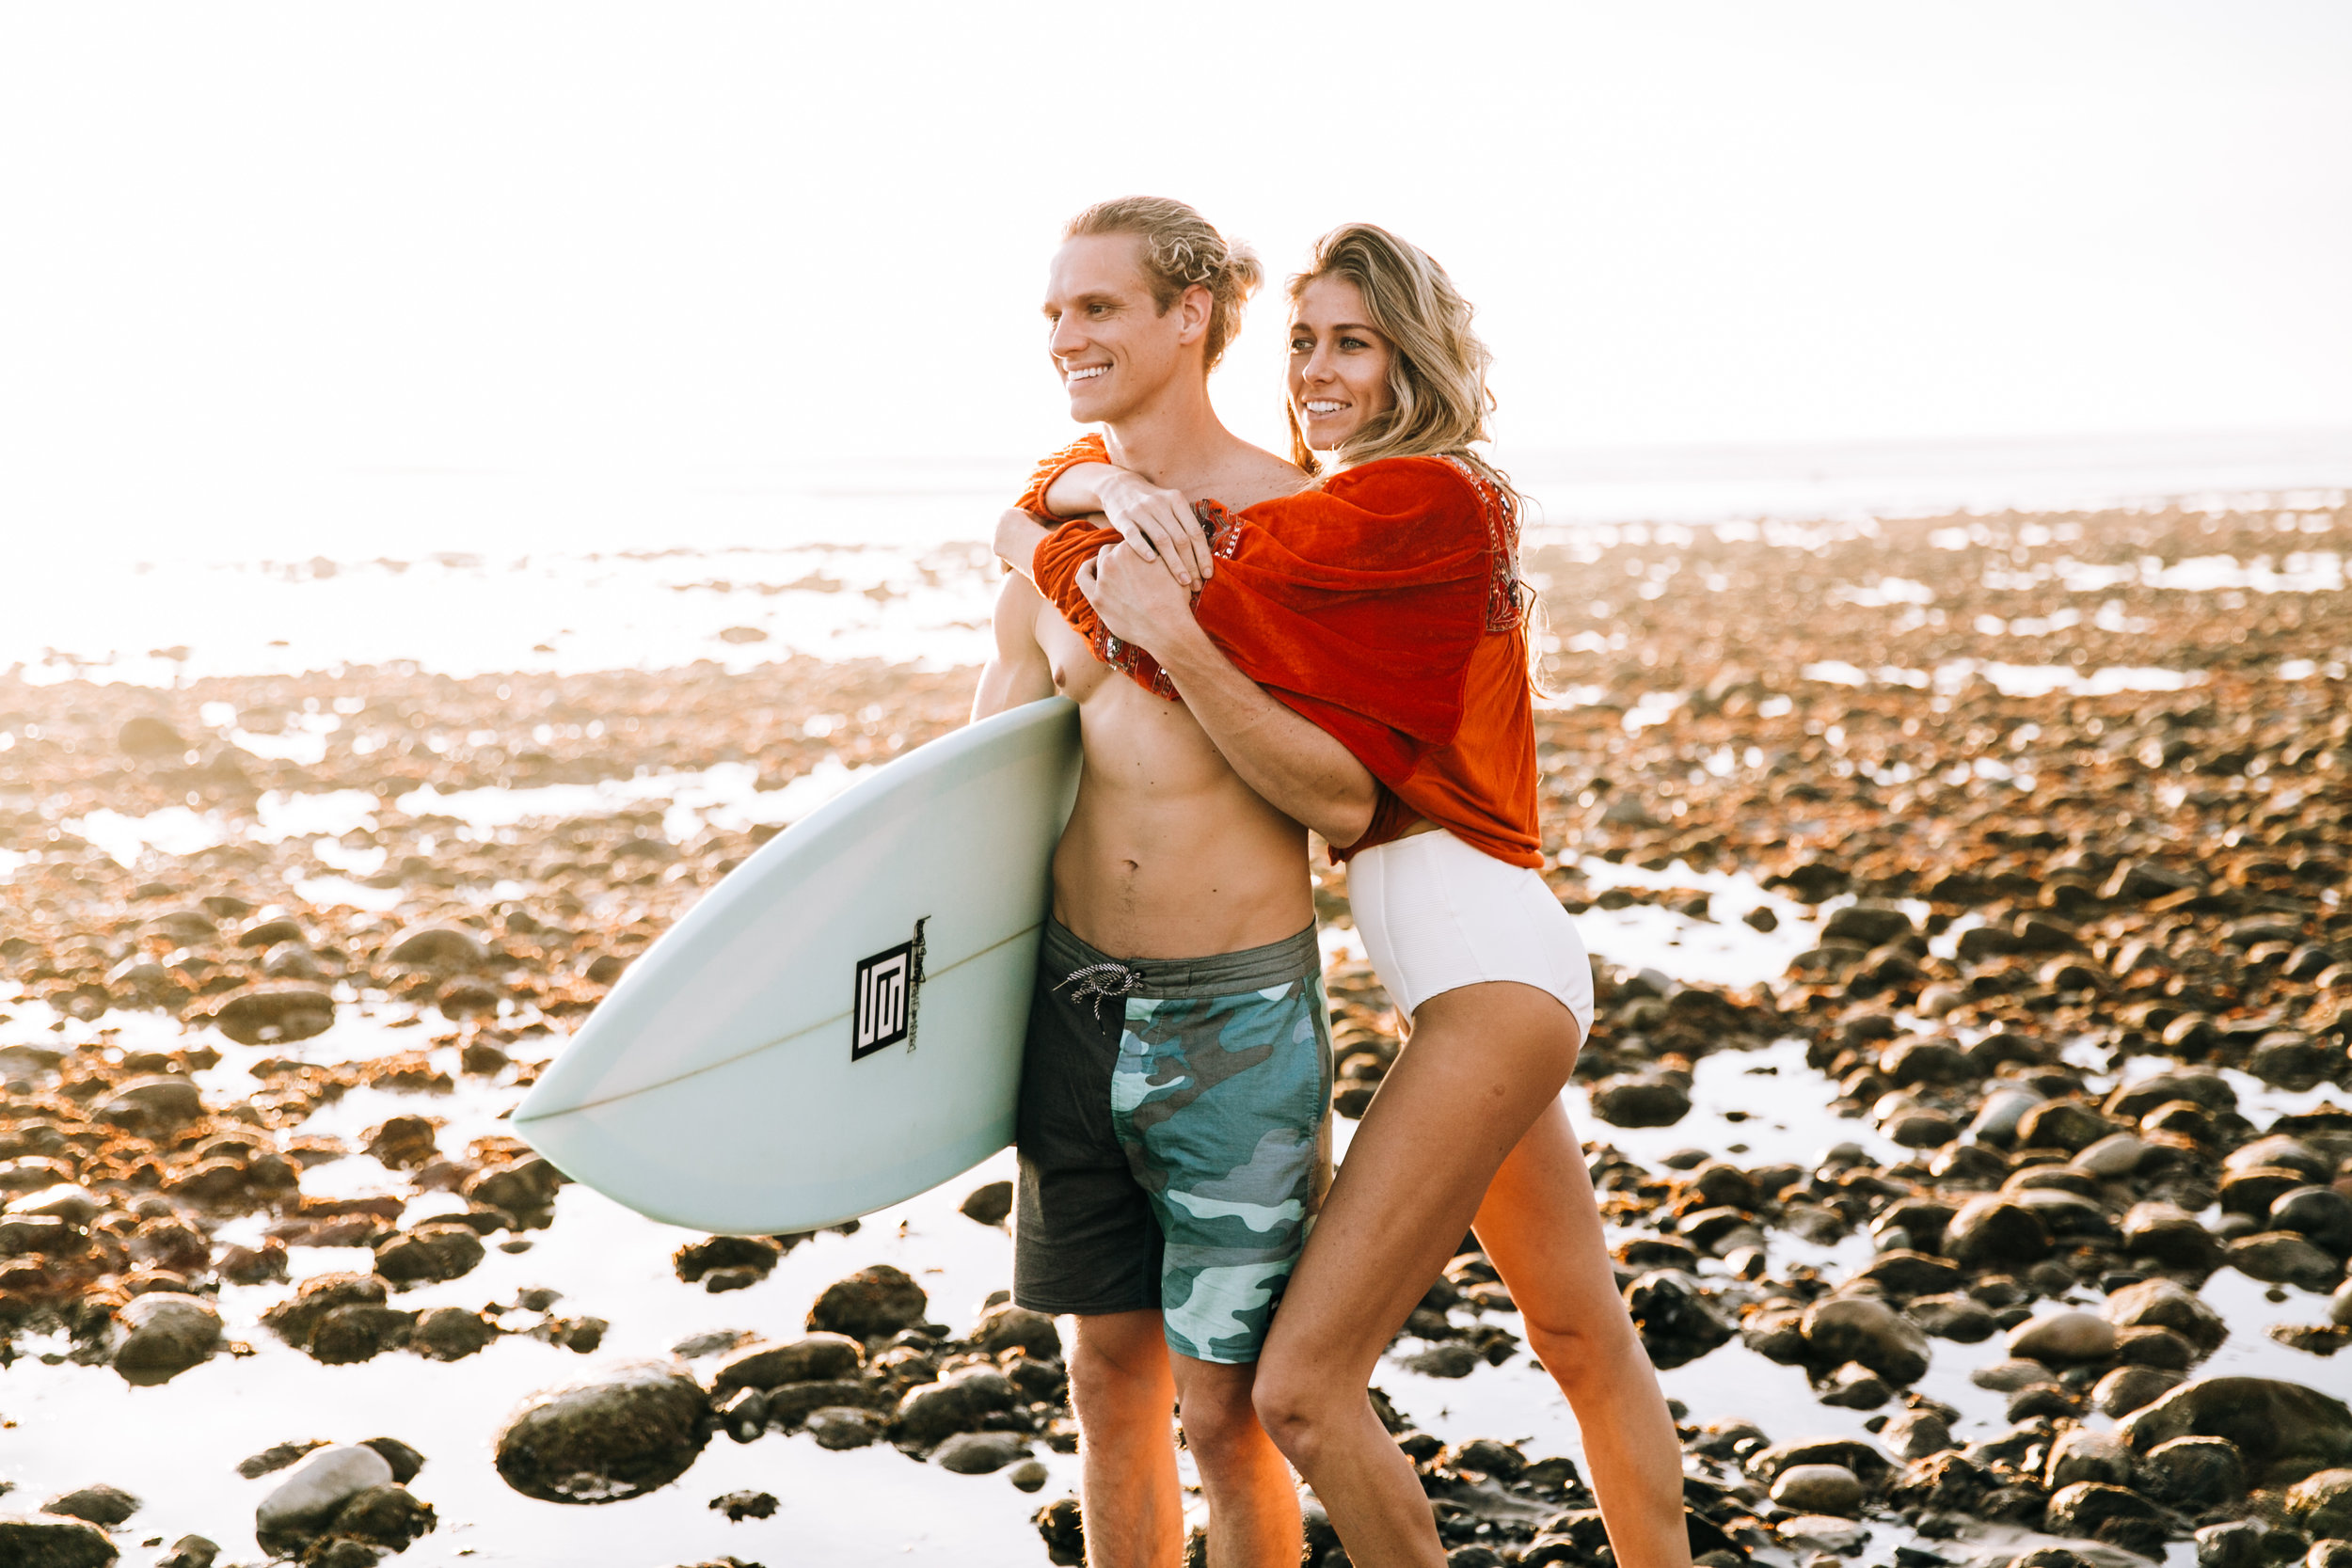 San Clemente engagement photographer, Southern California engagement photographer, Orange County engagement photographer, SoCal engagement photographer, San Onofre engagement session, San Onofre beach